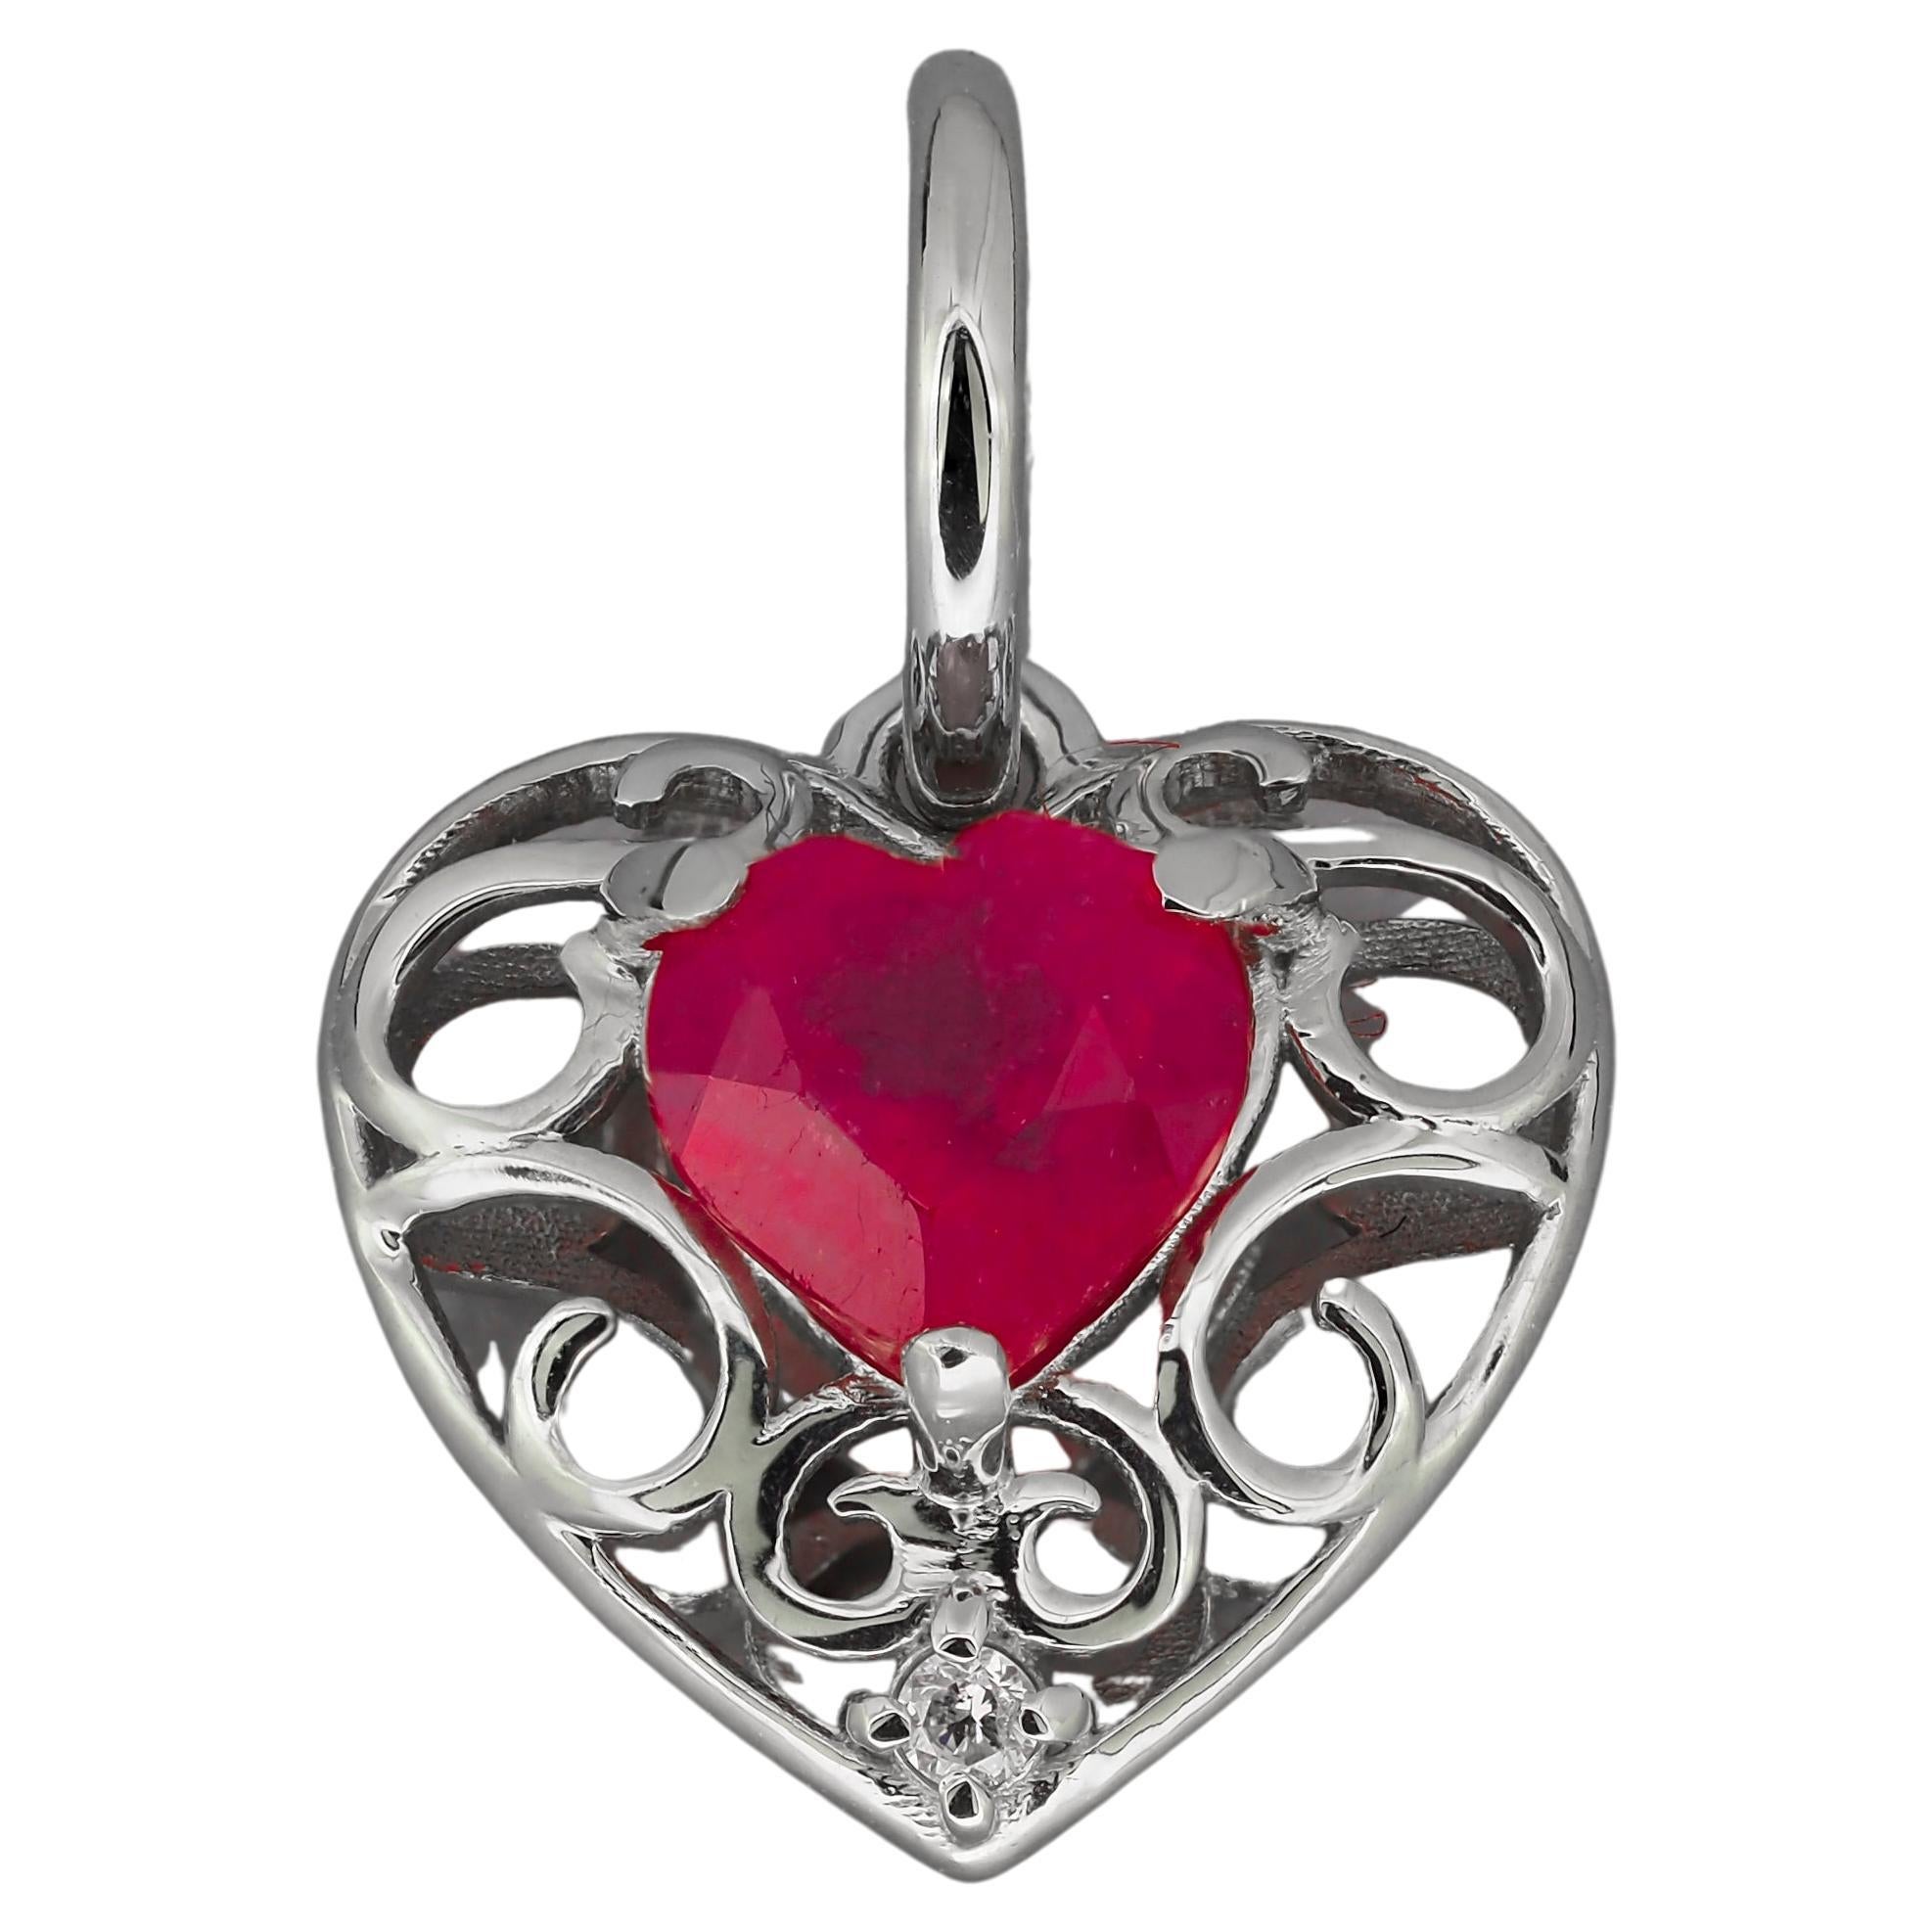 14k Gold "Heart" Pendant with Natural Ruby and Diamond, Heart Ruby Pendant